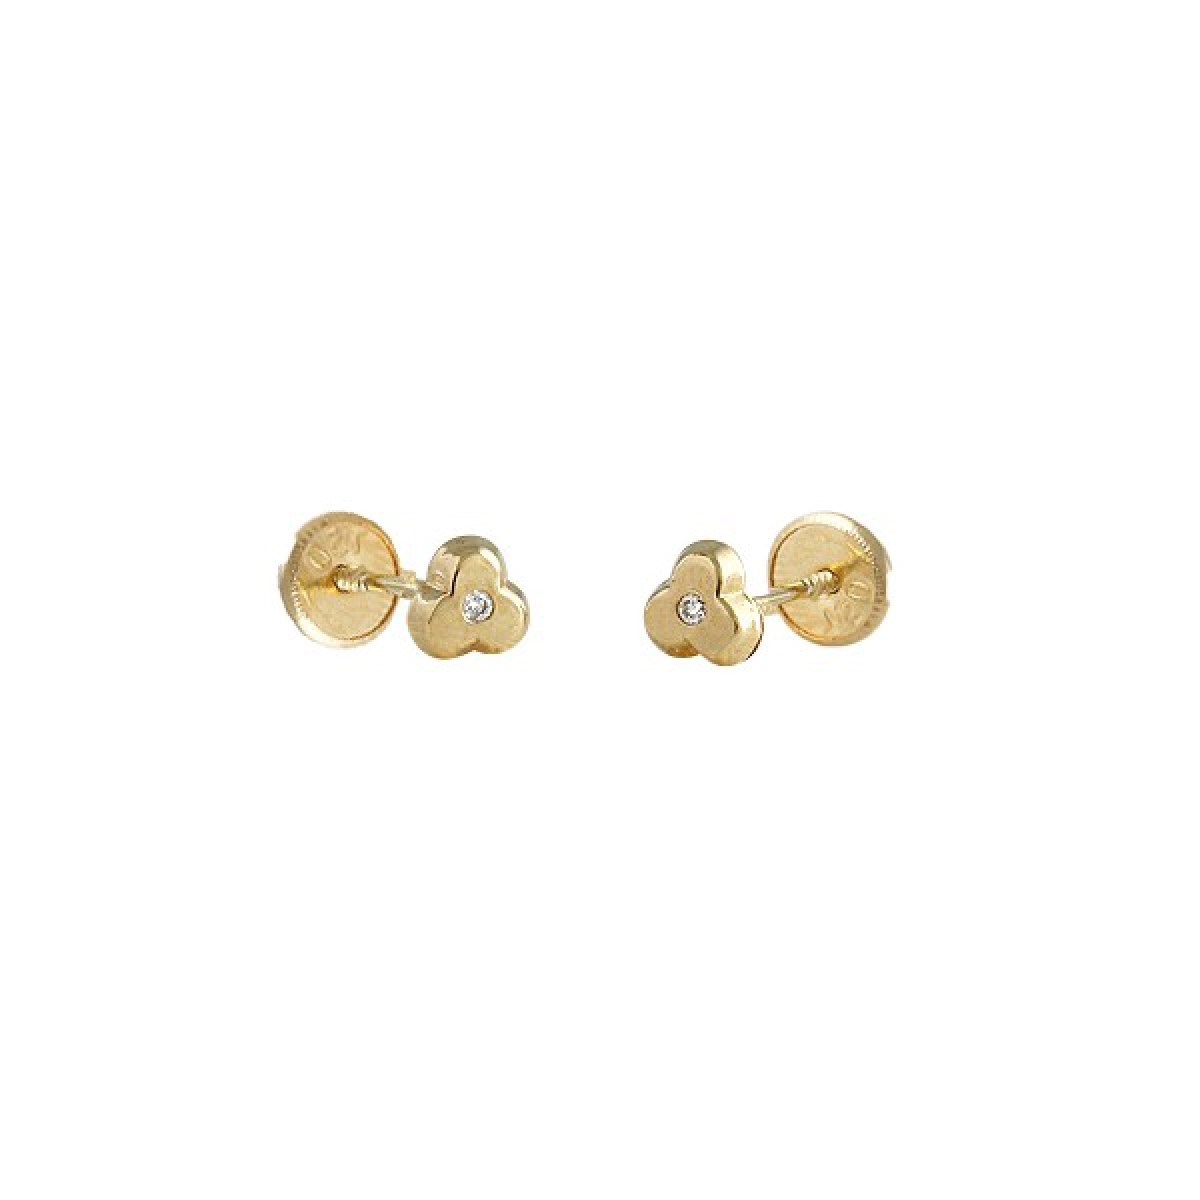 EARRINGS BABY LAW 18 K GOLD YELLOW WITH BRILLIANT 446435 O / Karammelo 446435 o/a